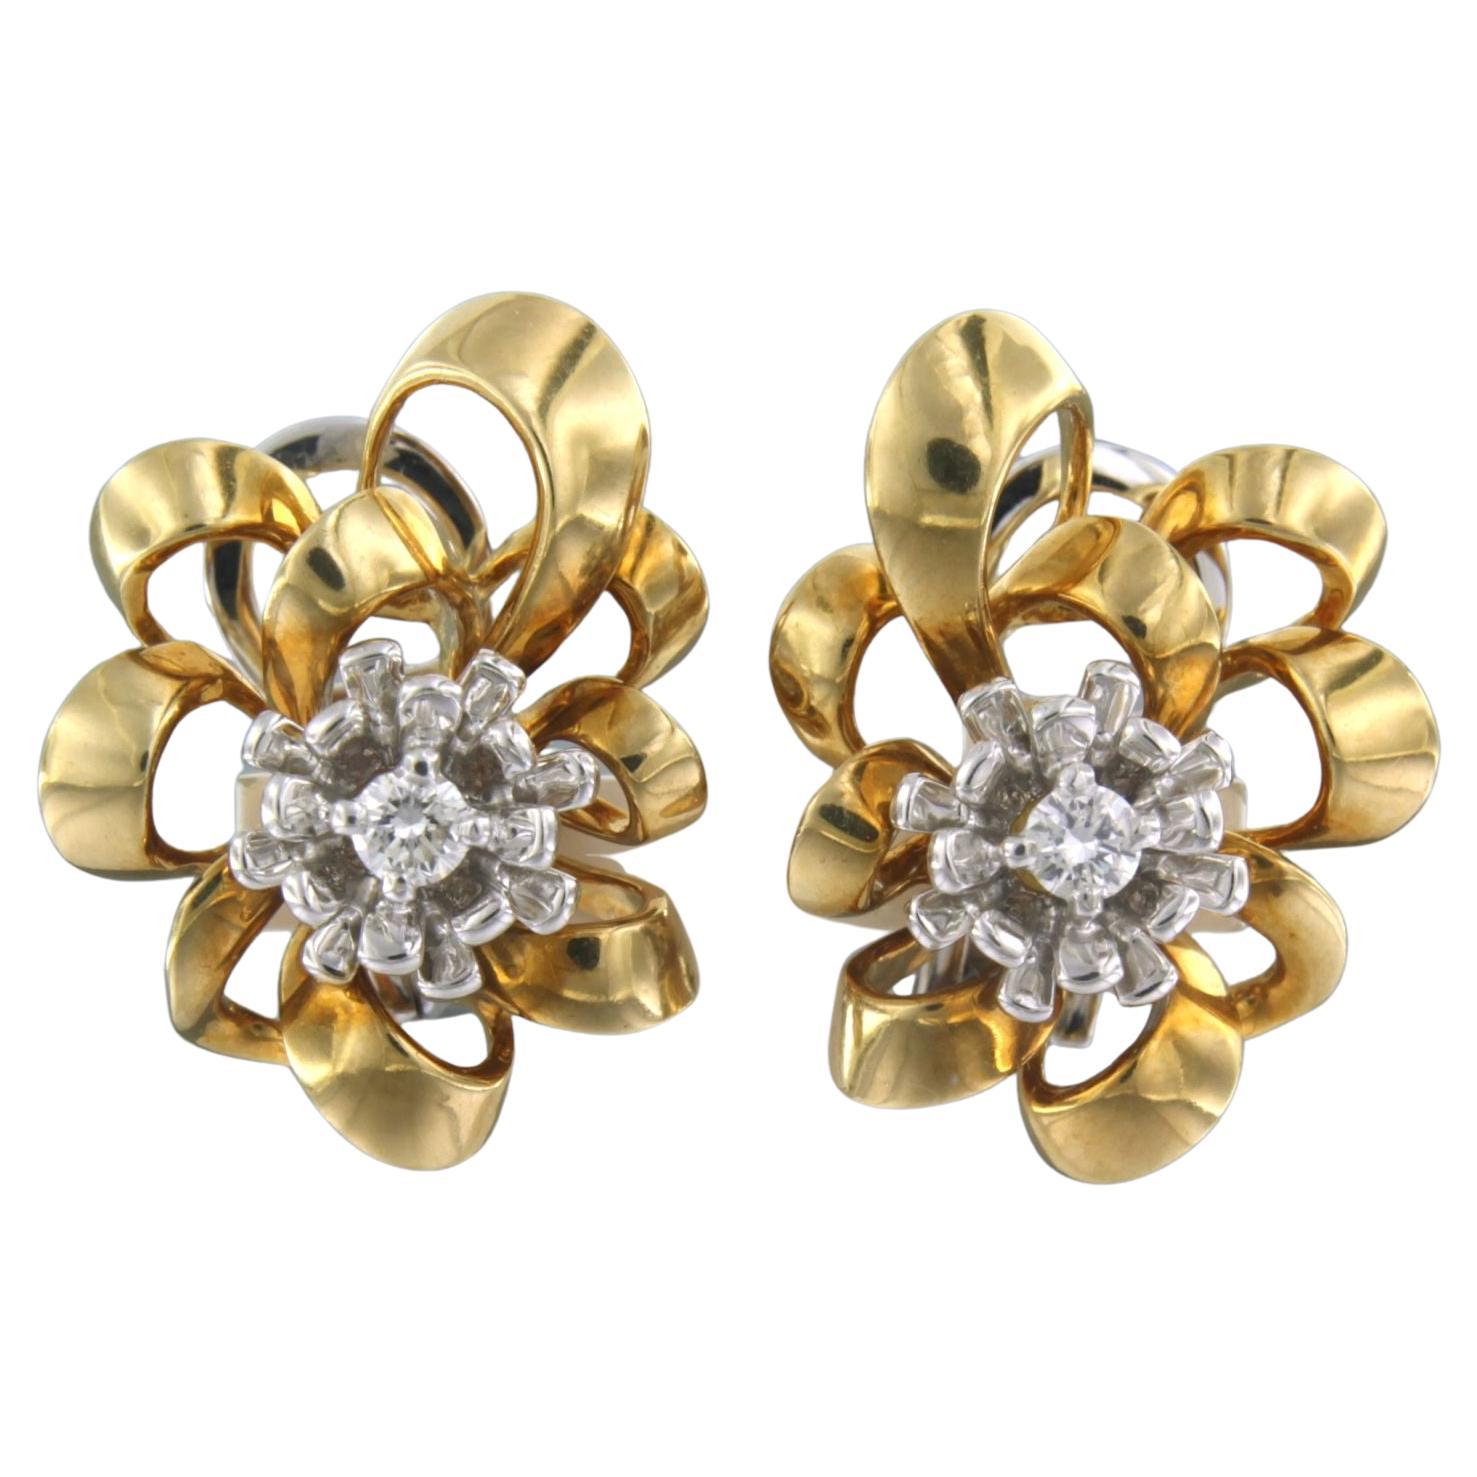 GOLD BAUER - Earrings set with diamonds 18k bicolour gold